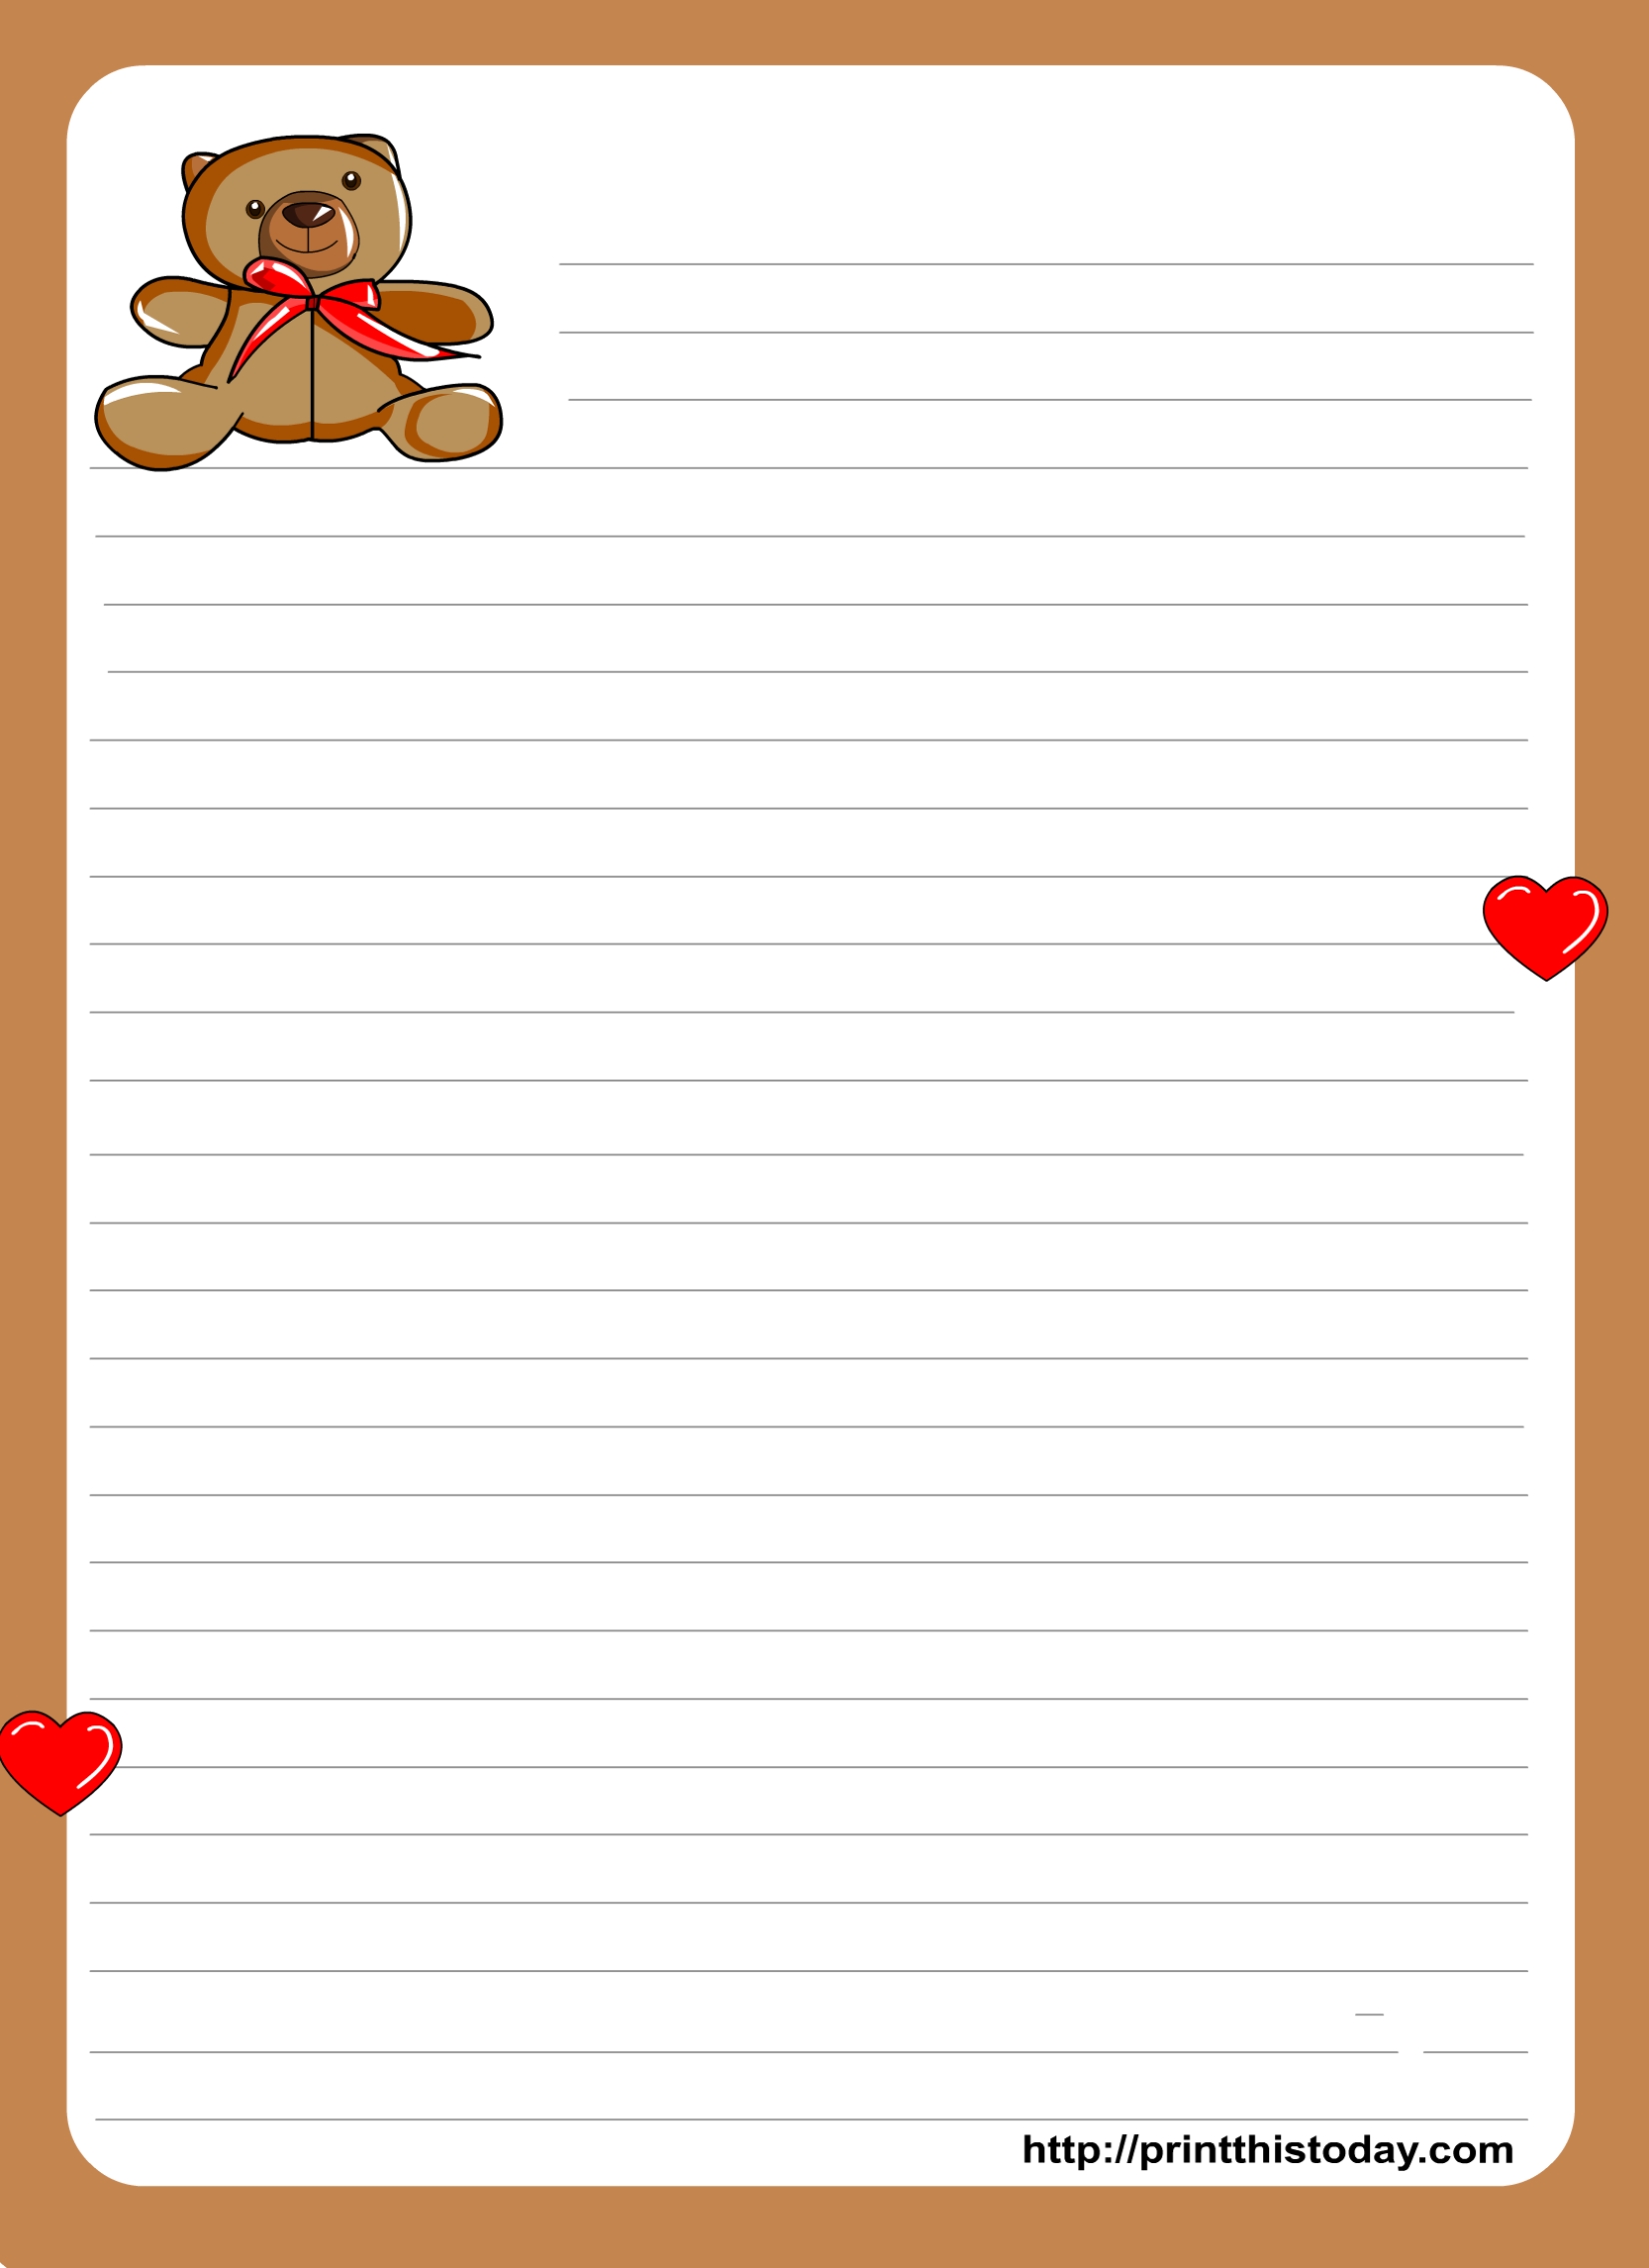 Teddy Bear Writing Paper For Kids throughout Letter Writing Template For Kids